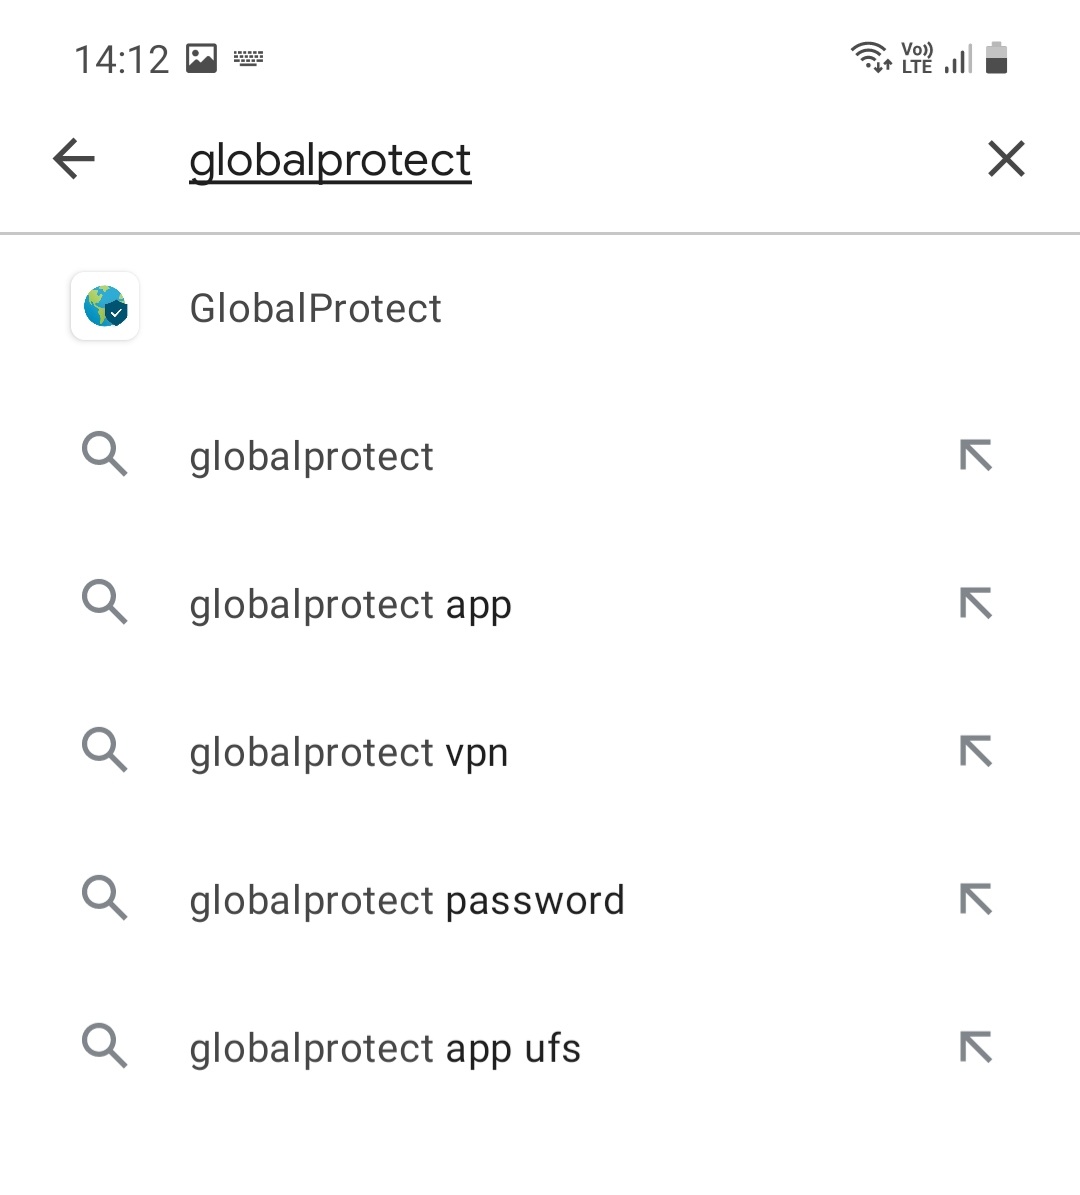 Write globalprotect in the search bar